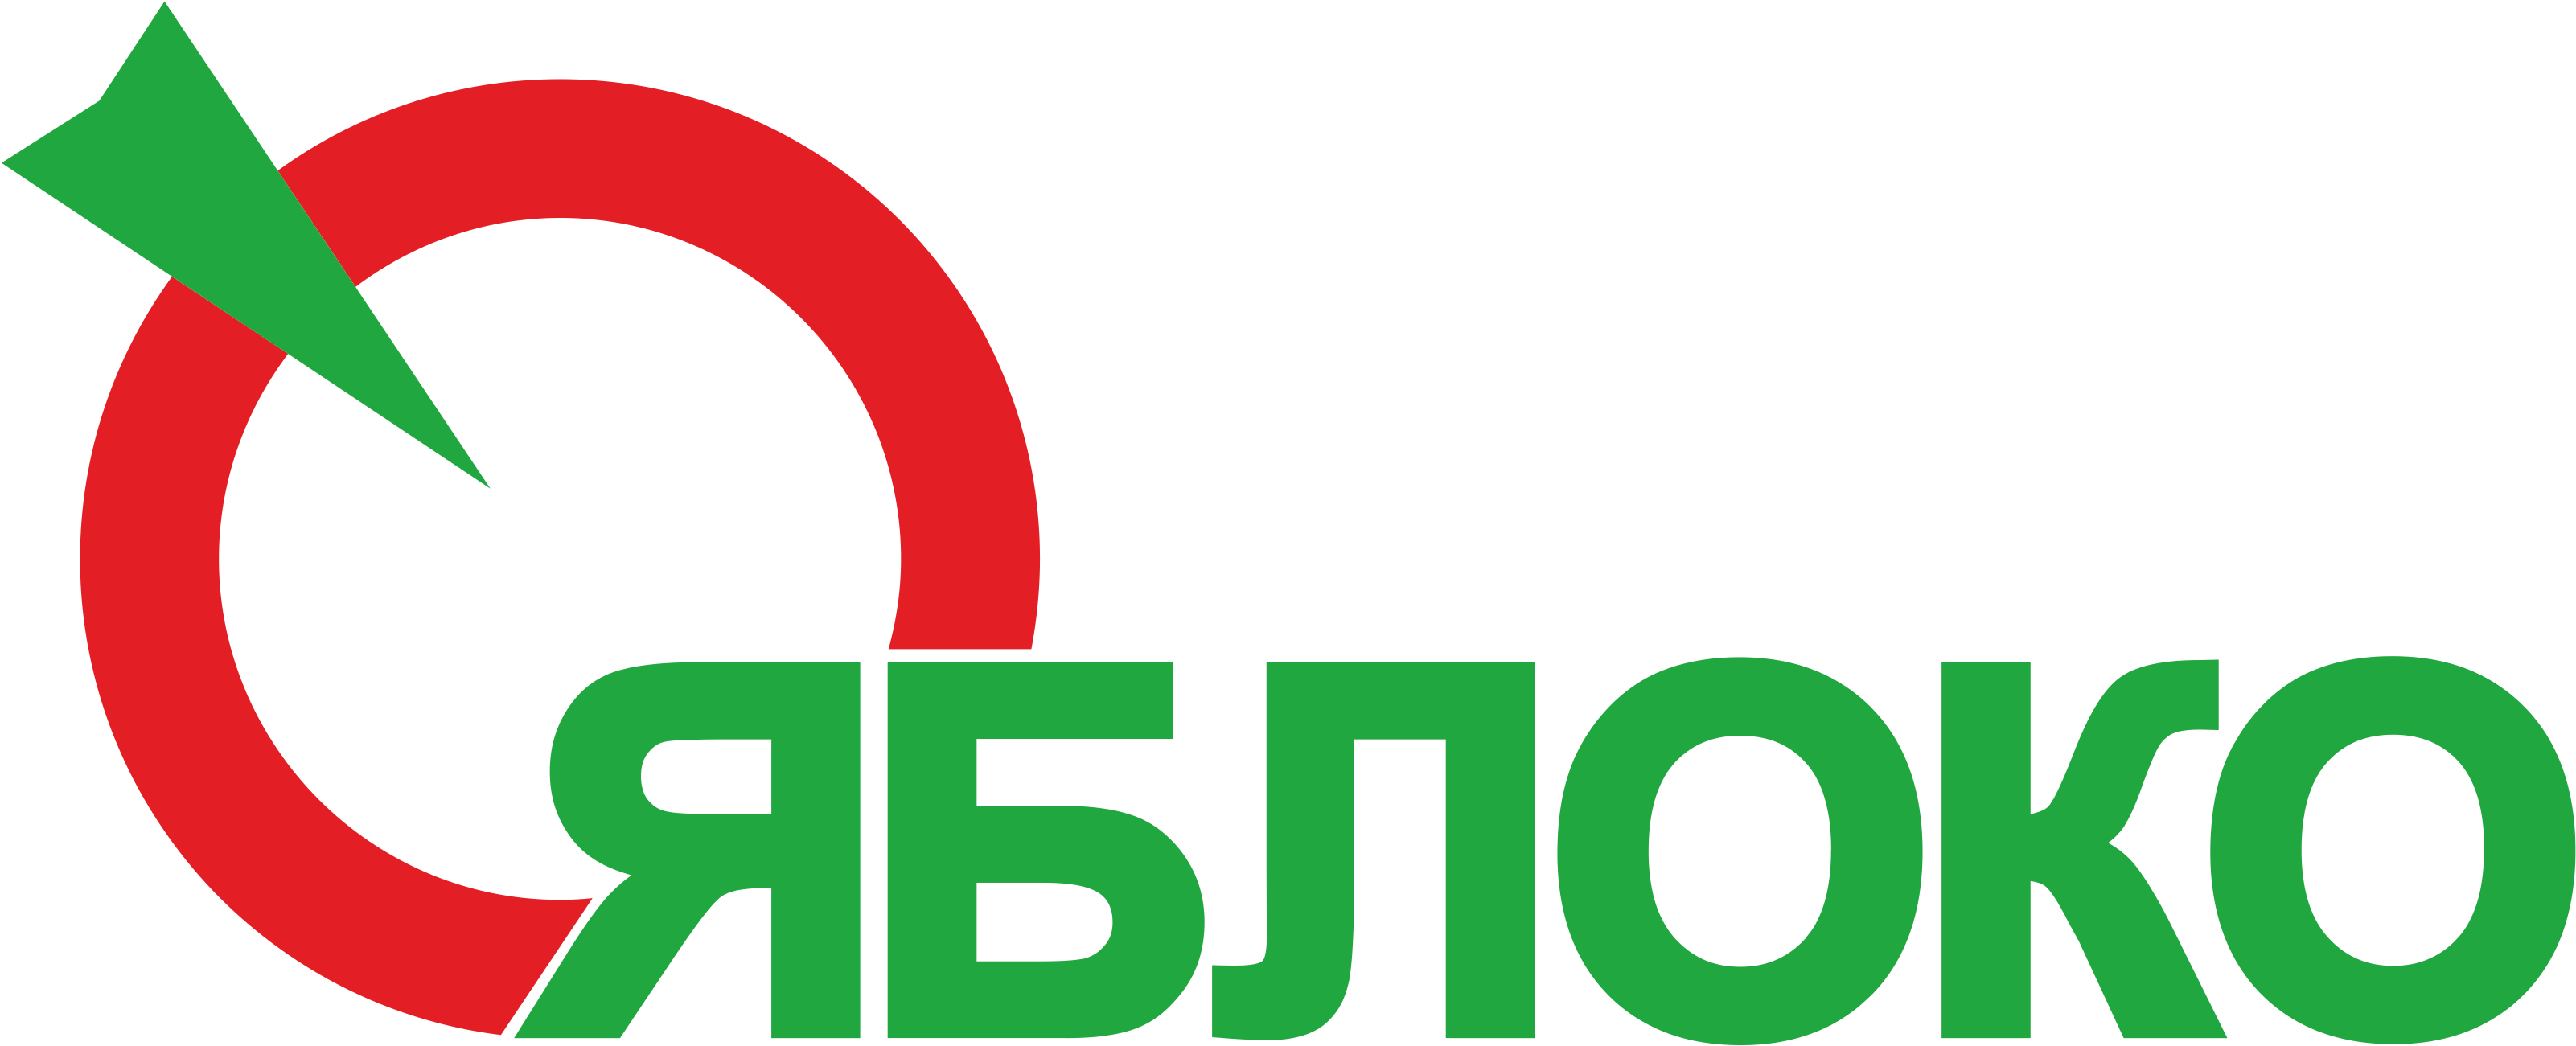 Logo Yabloko Party - Liberal Democratic Party Of Russia (3504x1711)